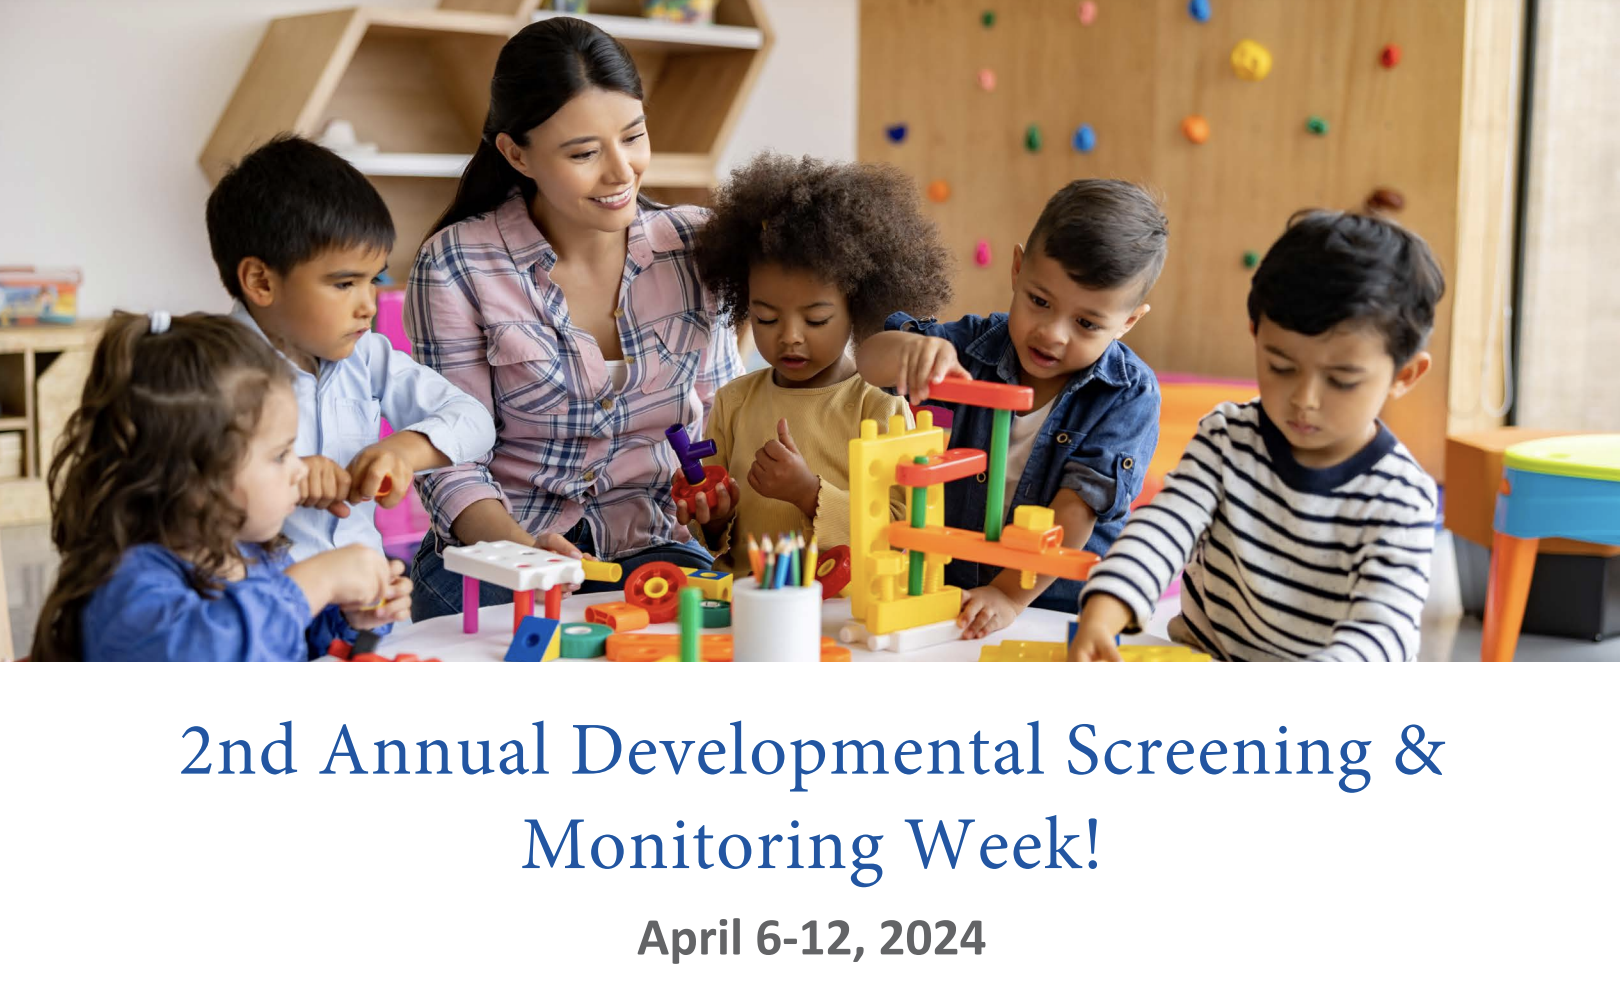 Join us for Developmental Monitoring and Screening Week